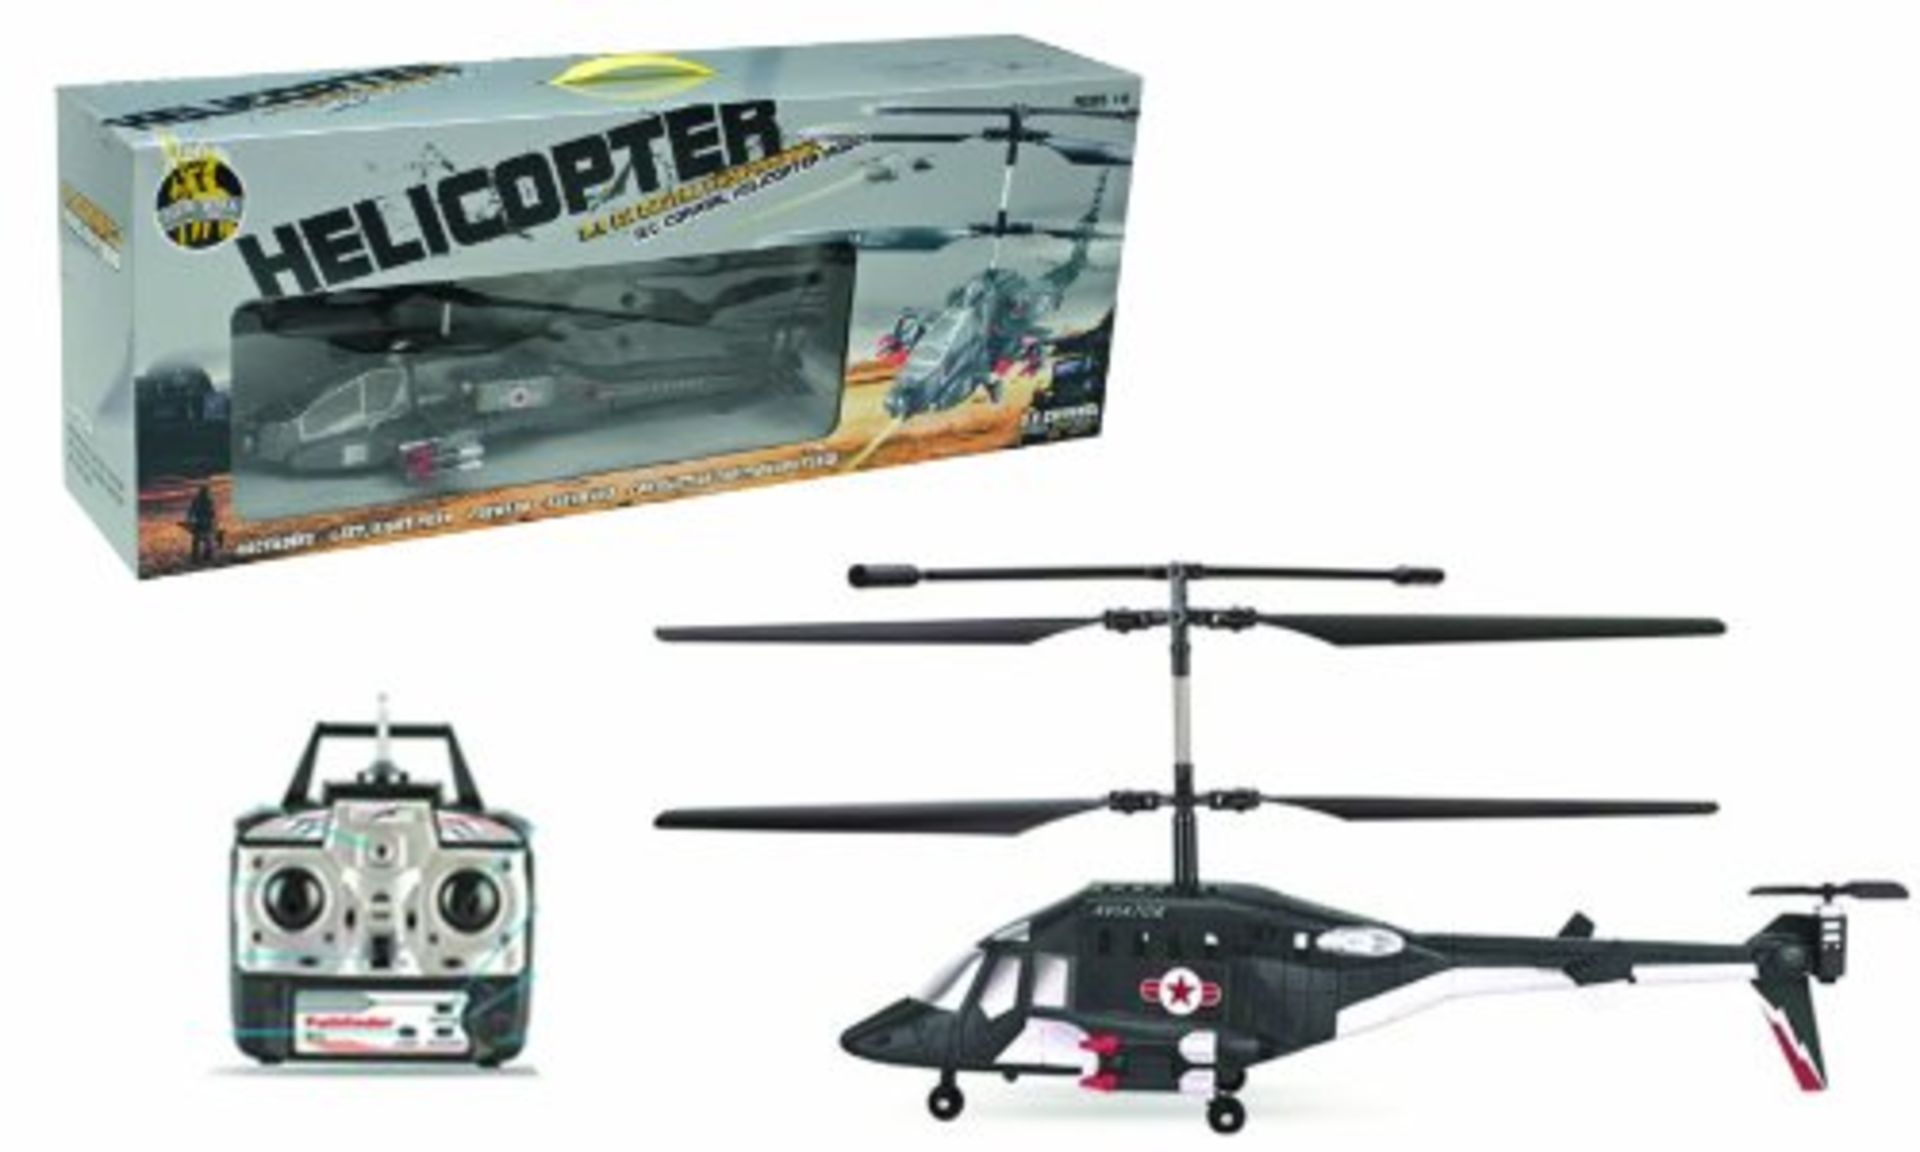 V *TRADE QTY* Brand New R/C Military Helicopter Coaxial Model 3.5 Channel Convolution Function and